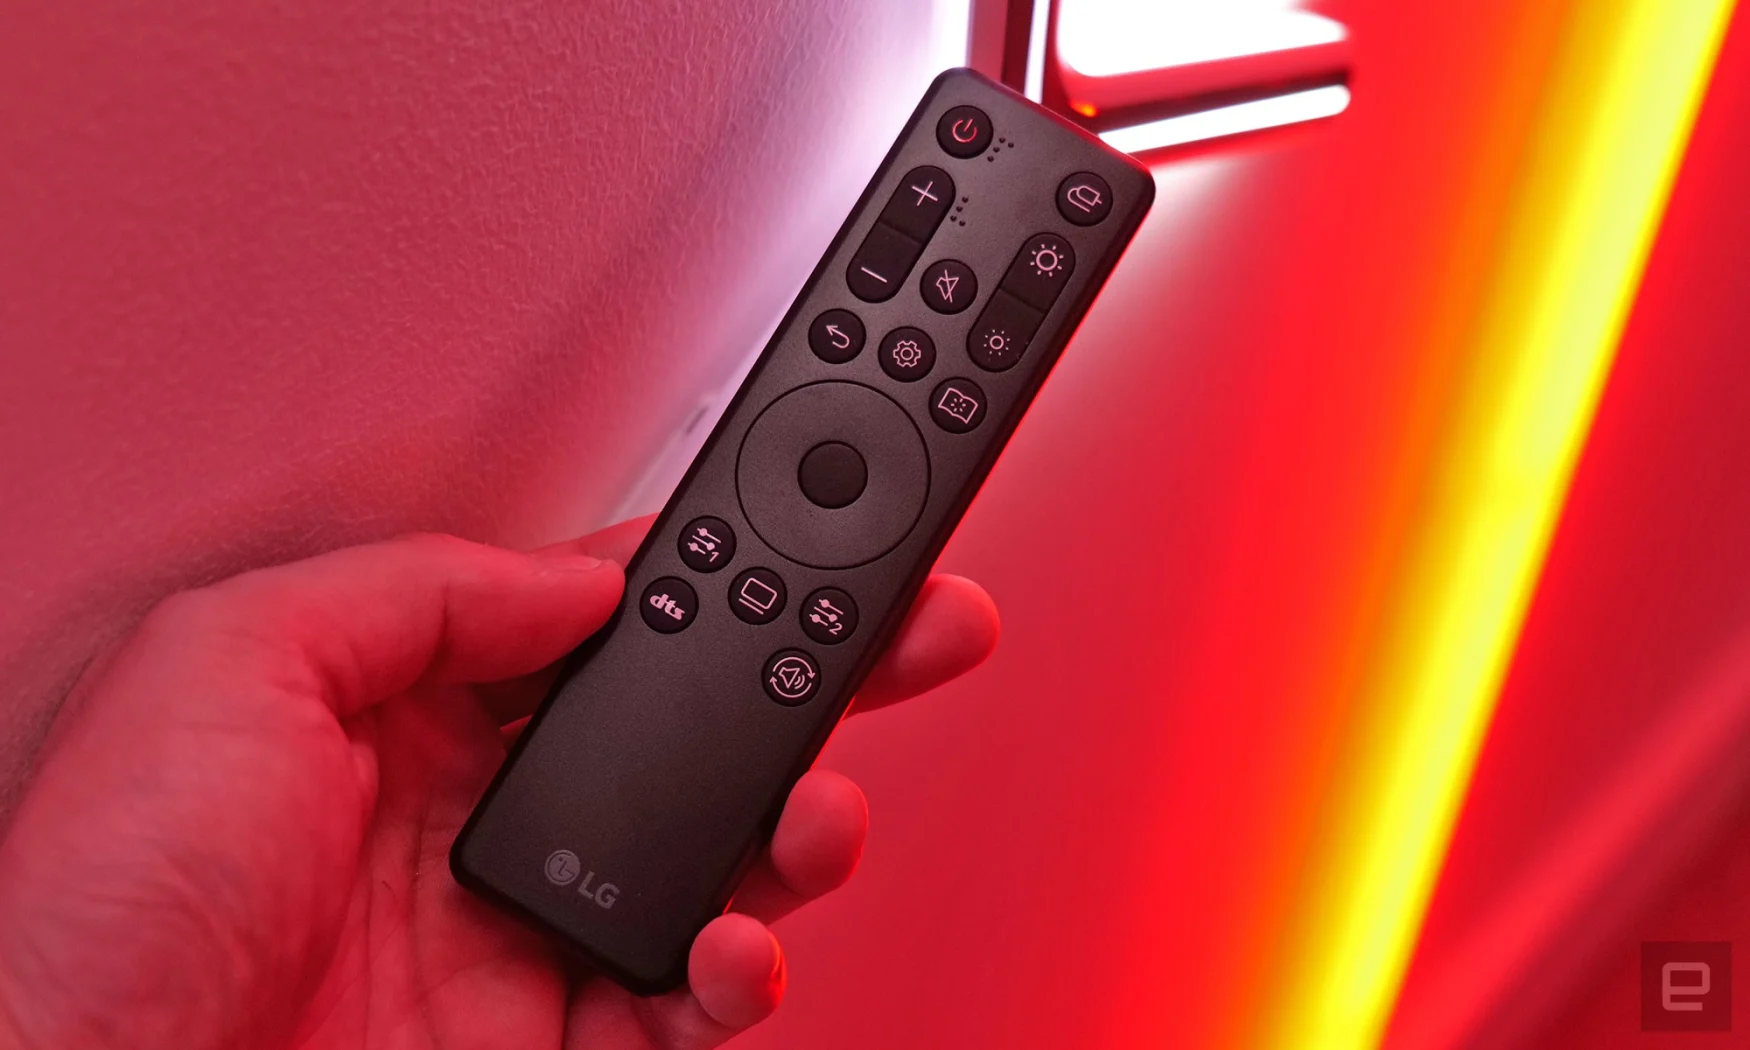 Instead of relying on hidden buttons or joysticks, for its latest UltraGear gaming monitors, LG created a new dedicated remote control for adjusting picture settings. 